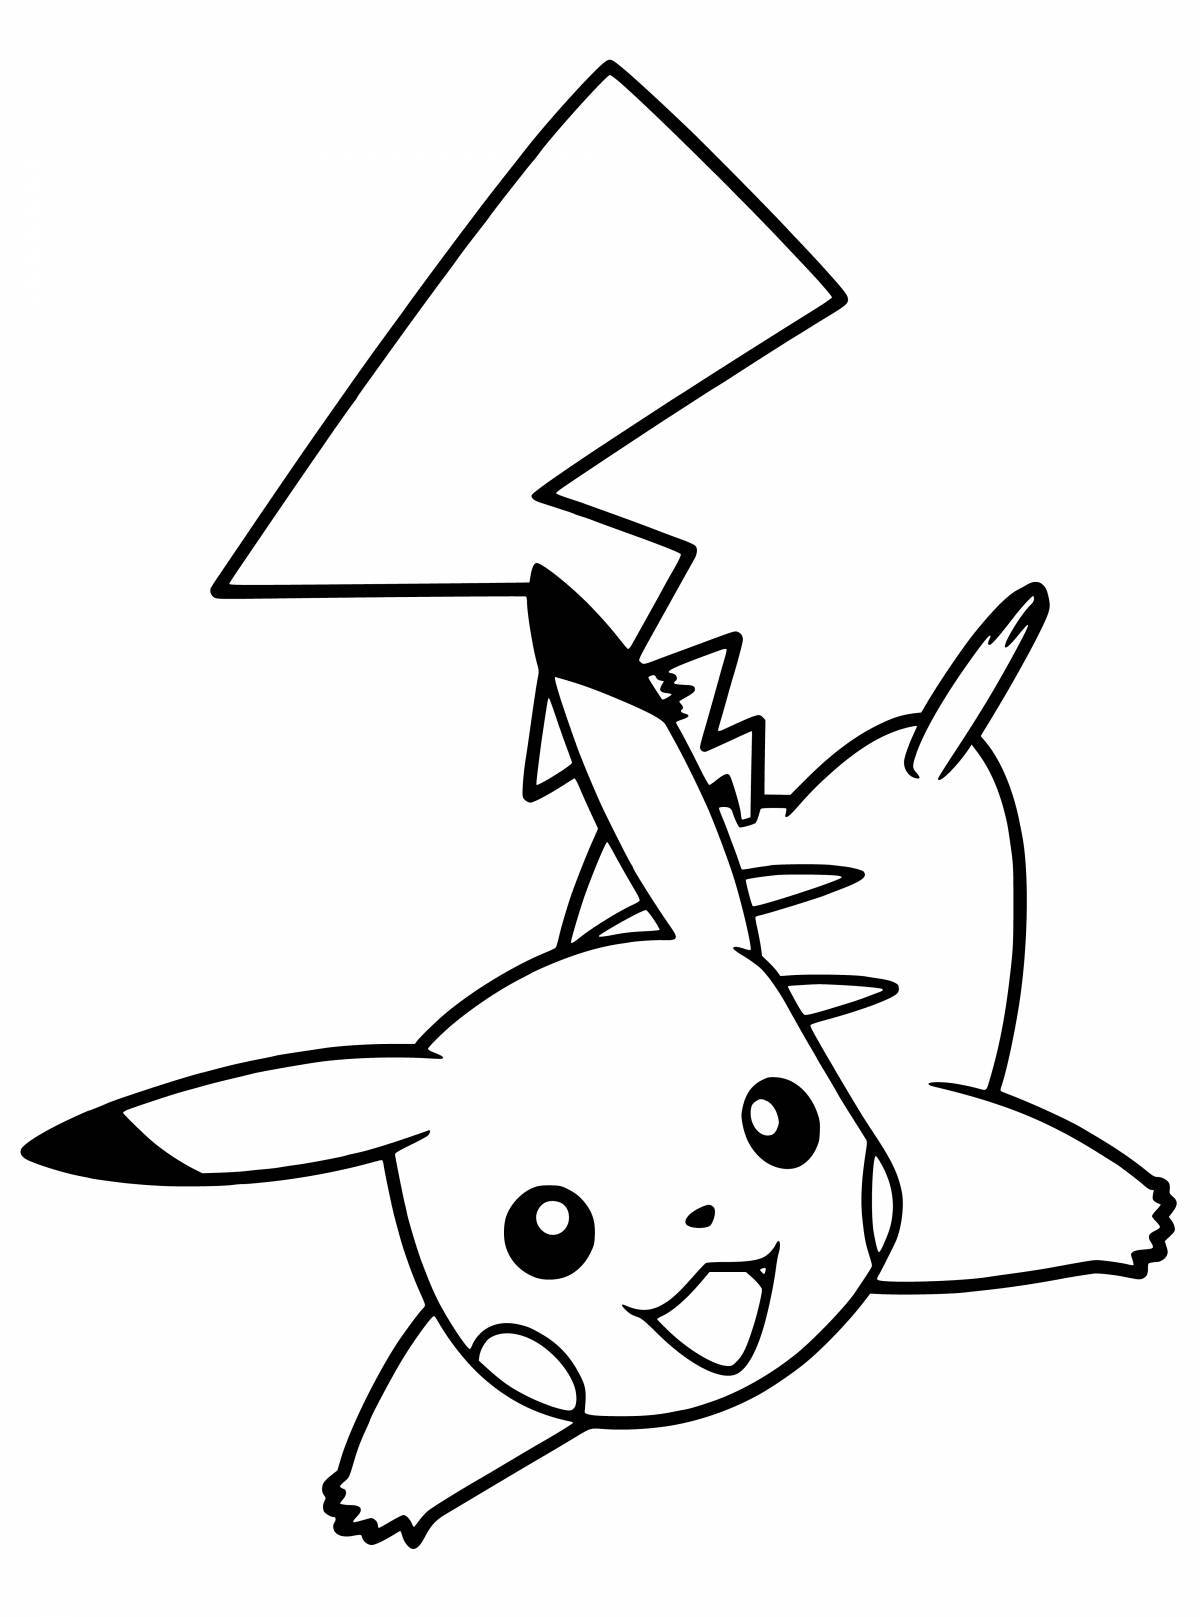 Exciting pikachu coloring book for kids